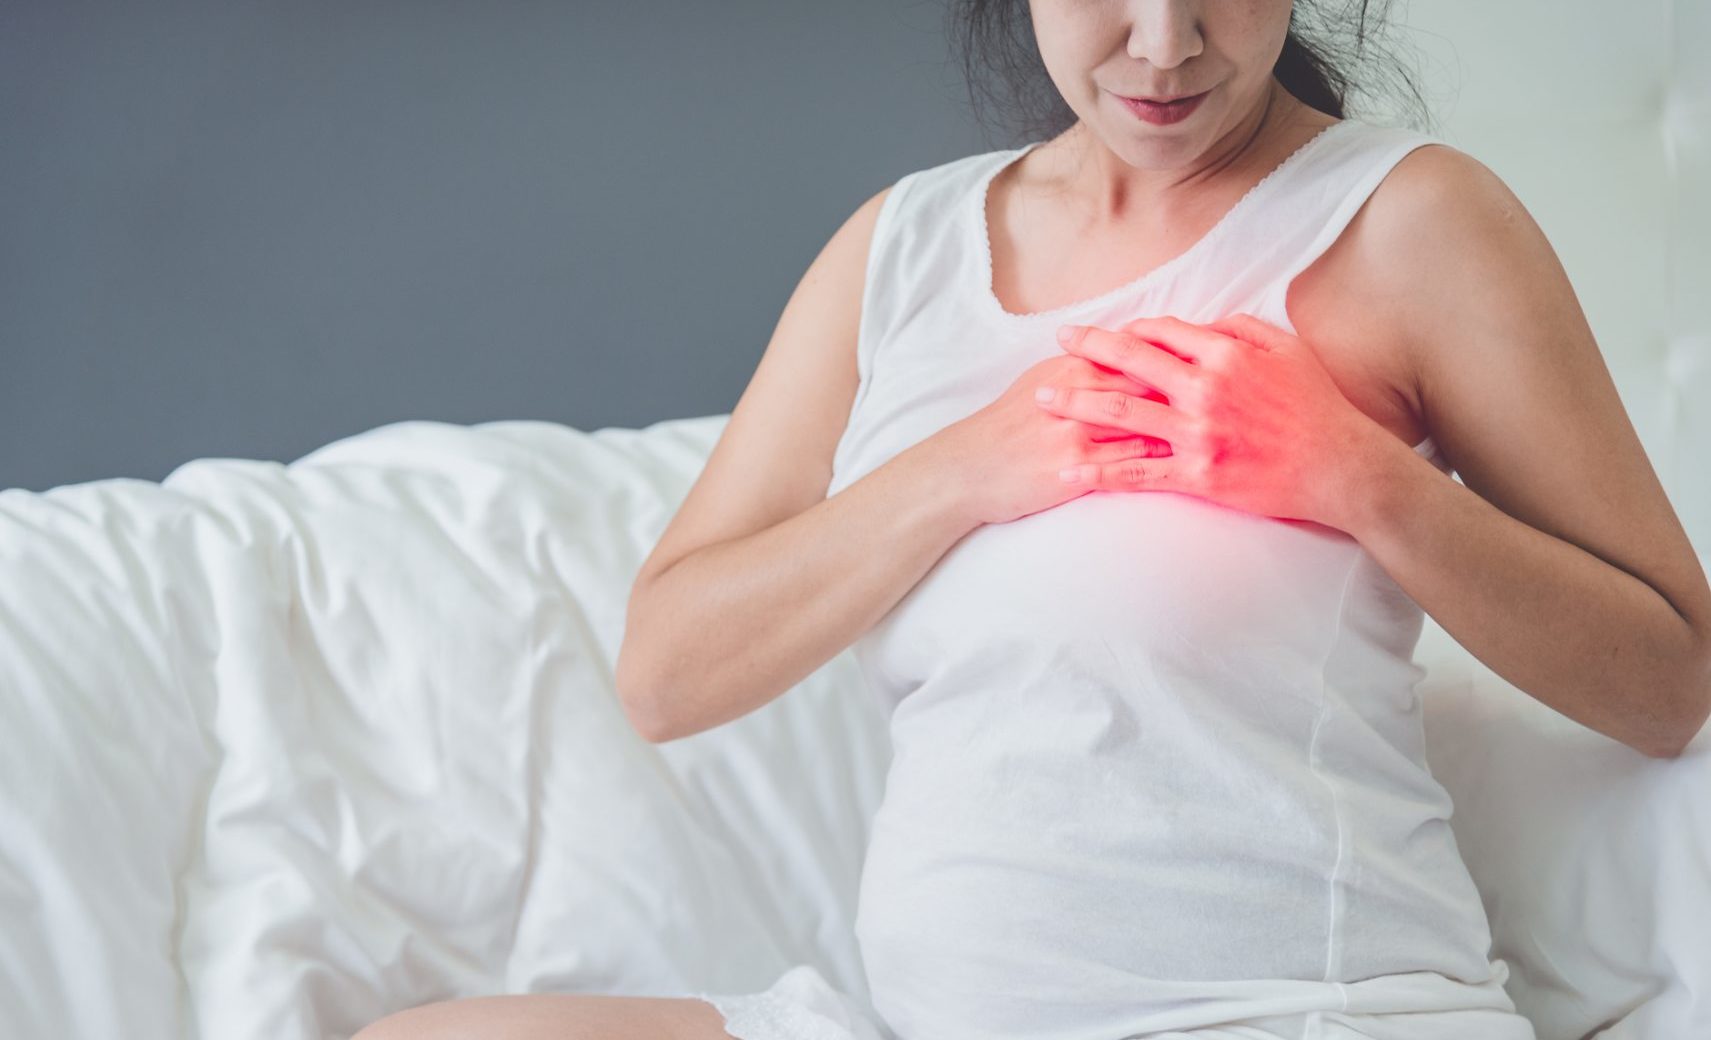 Breast Pain During Pregnancy: Symptoms And Tips To Reduce It